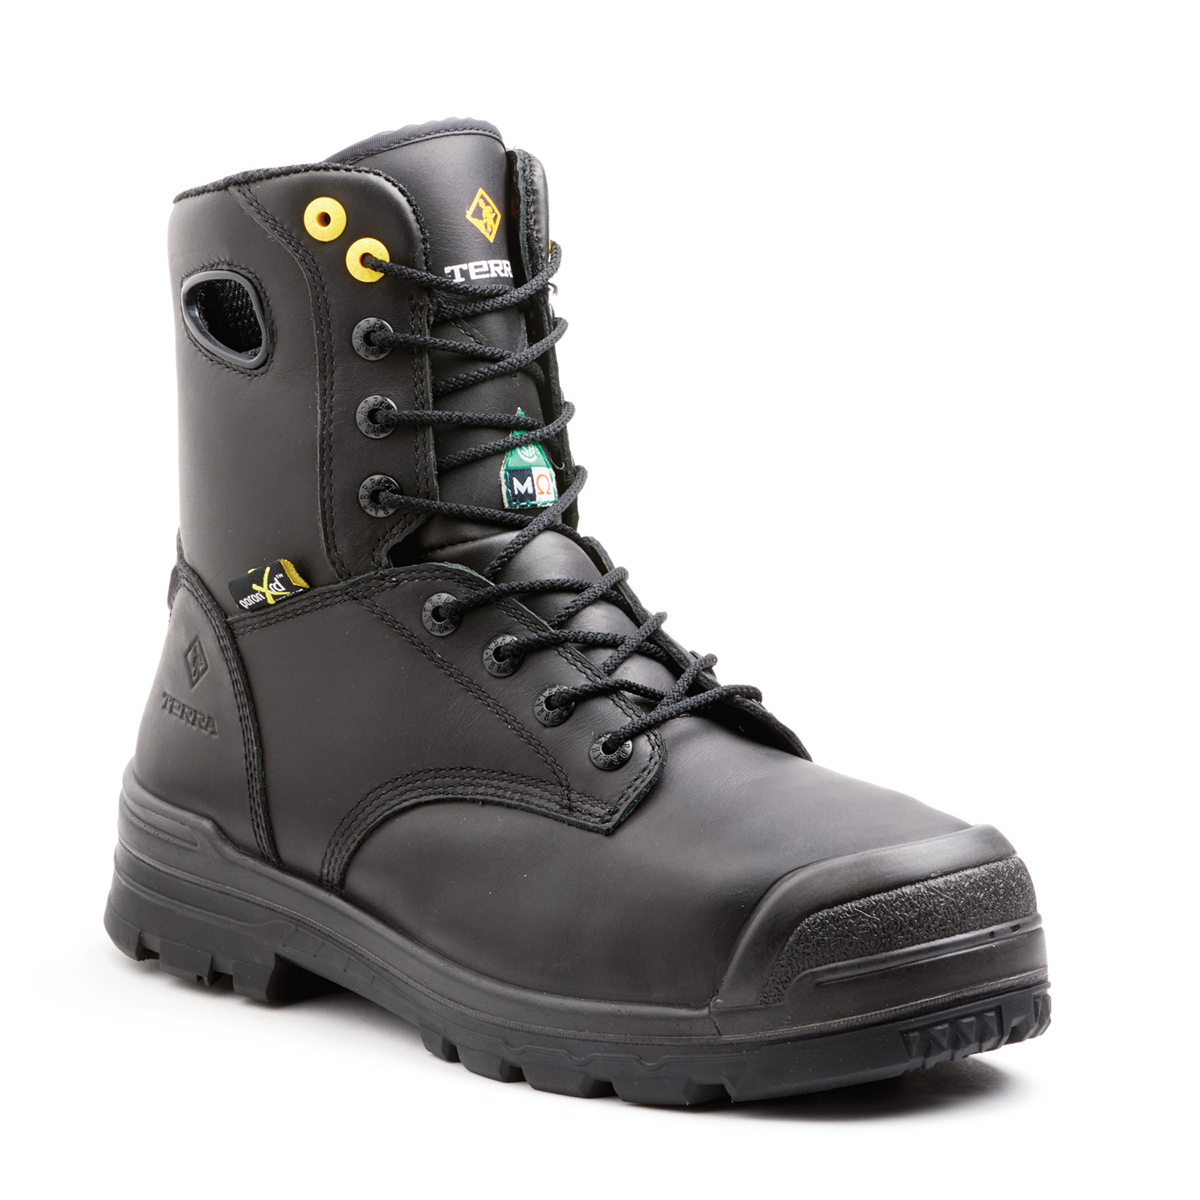 TERRA Size 13 Black Paladin Leather Composite Toe Metguard Boots With High Traction, Anti F.O.D. Slip Resistant Rubber Outsole